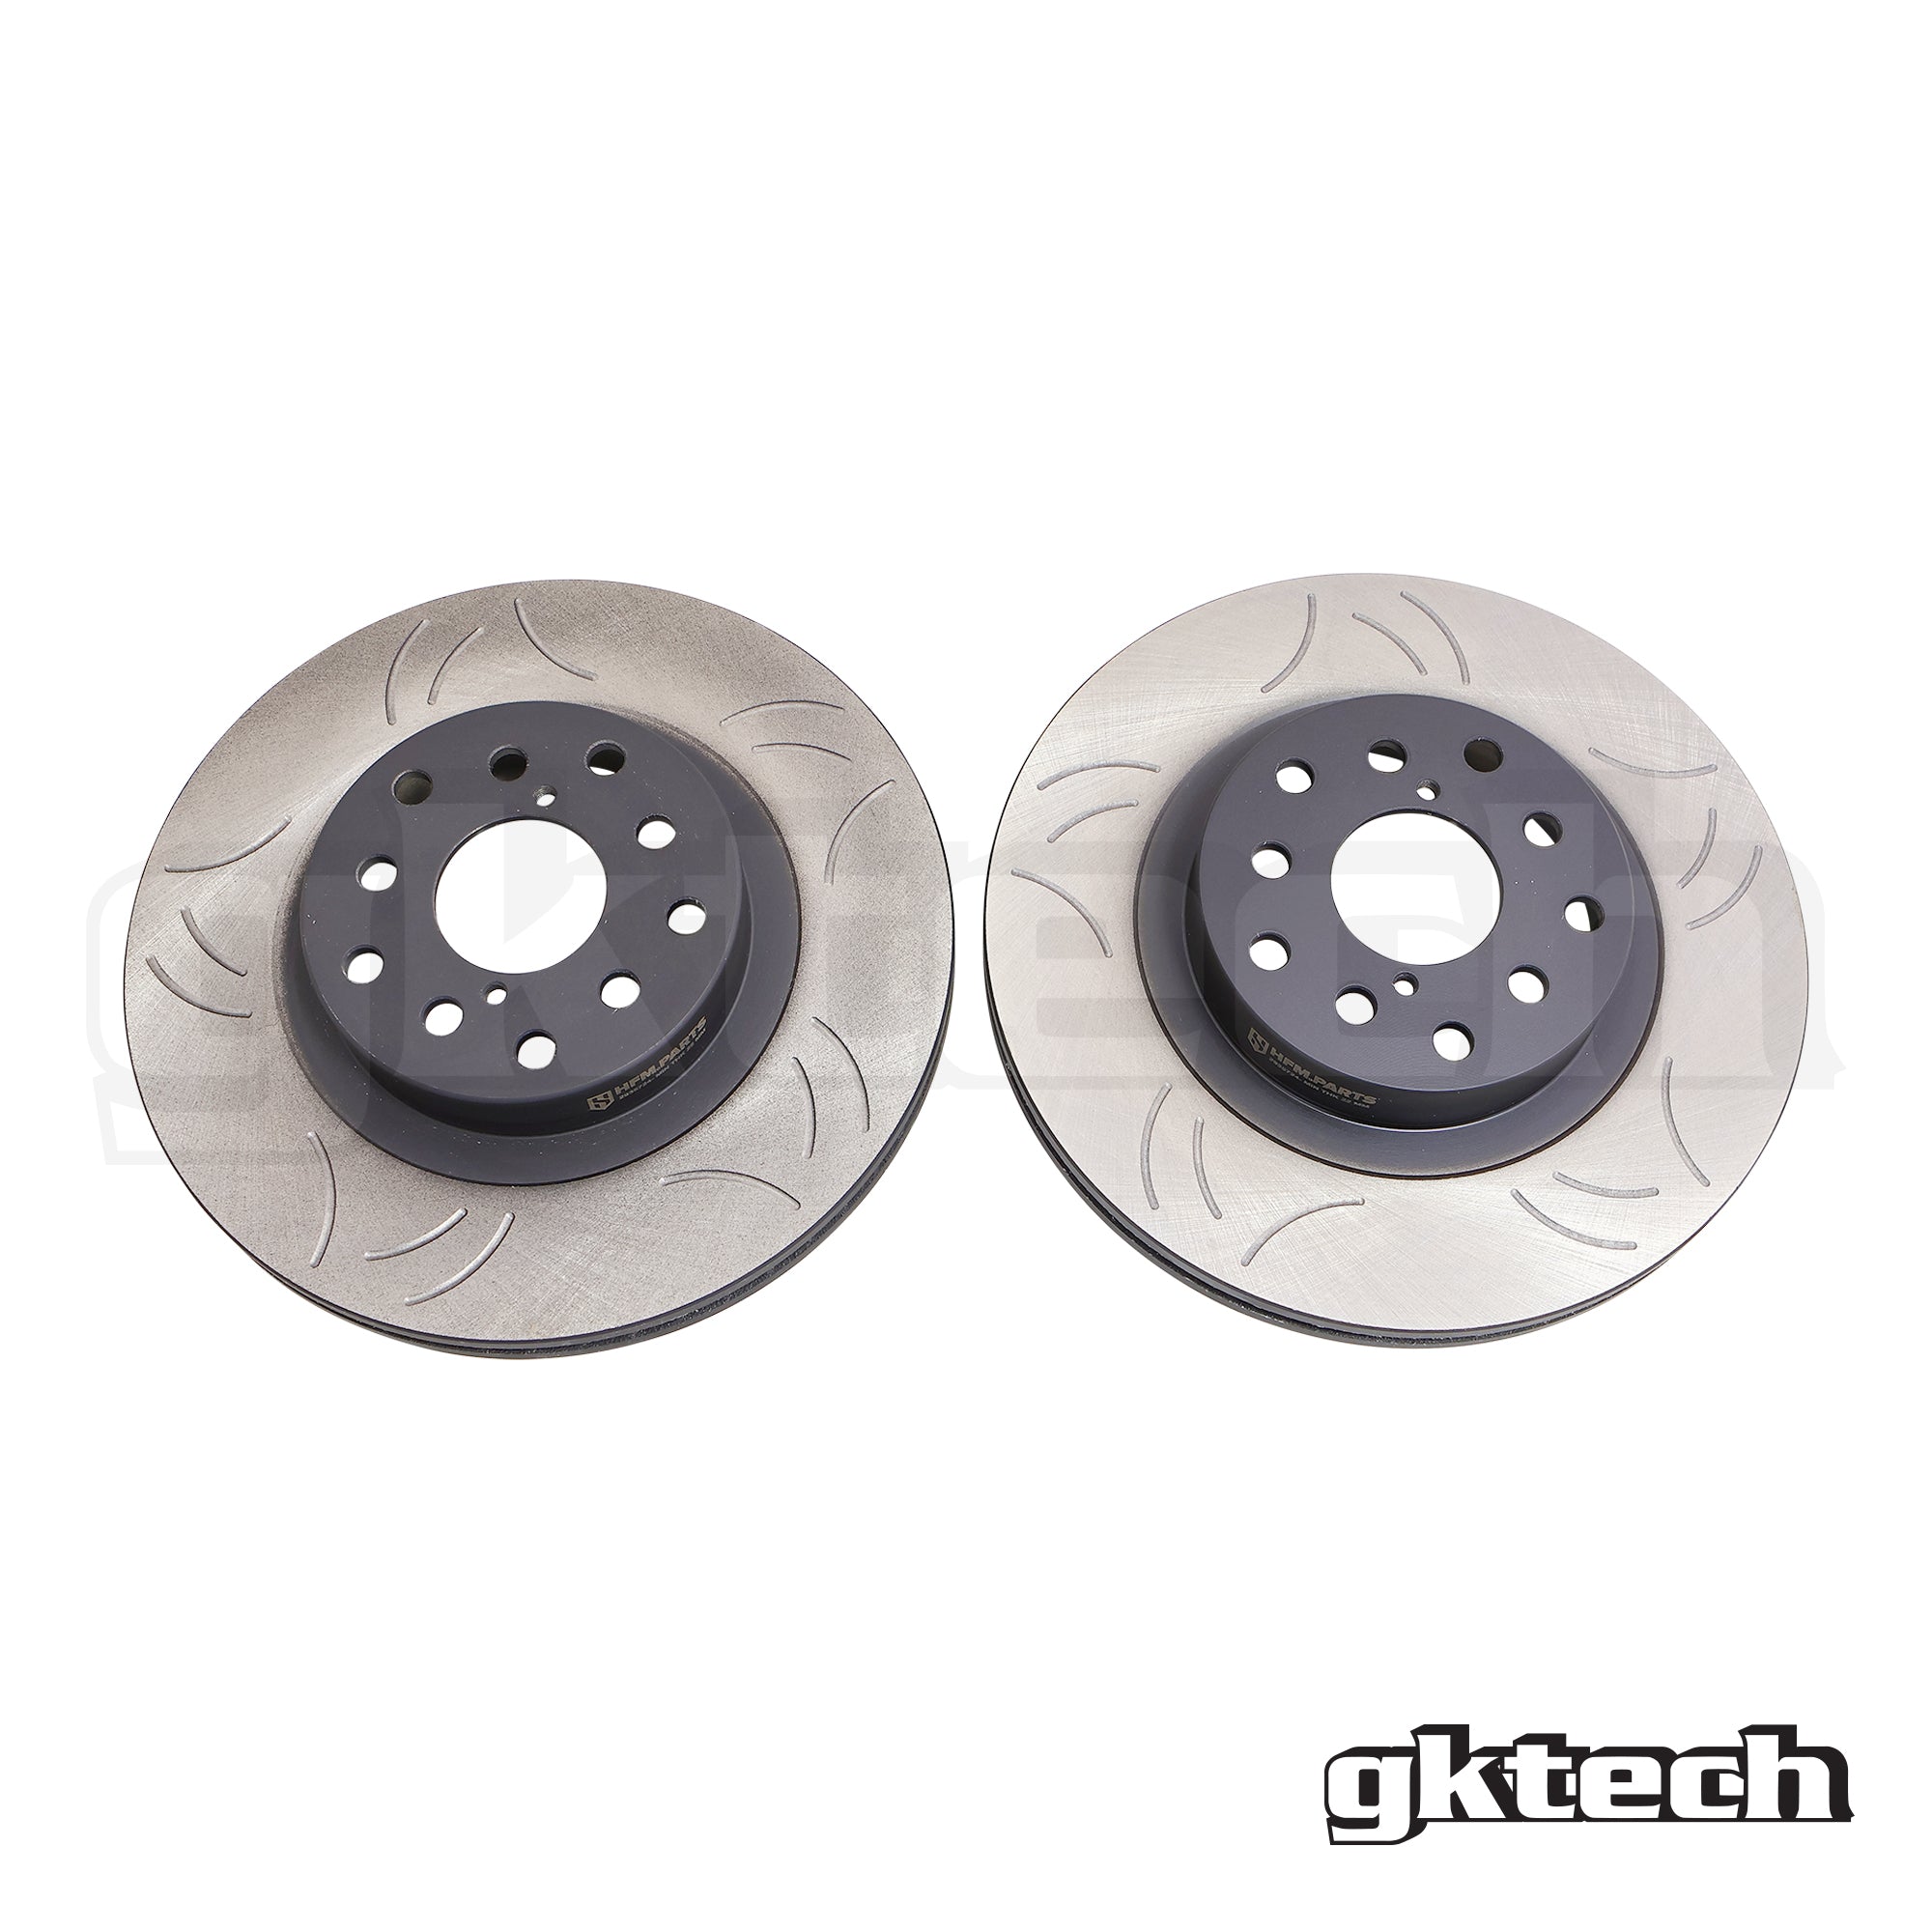 86 / GR86 / BRZ 5x114.3 conversion front brake rotors (sold as a pair)